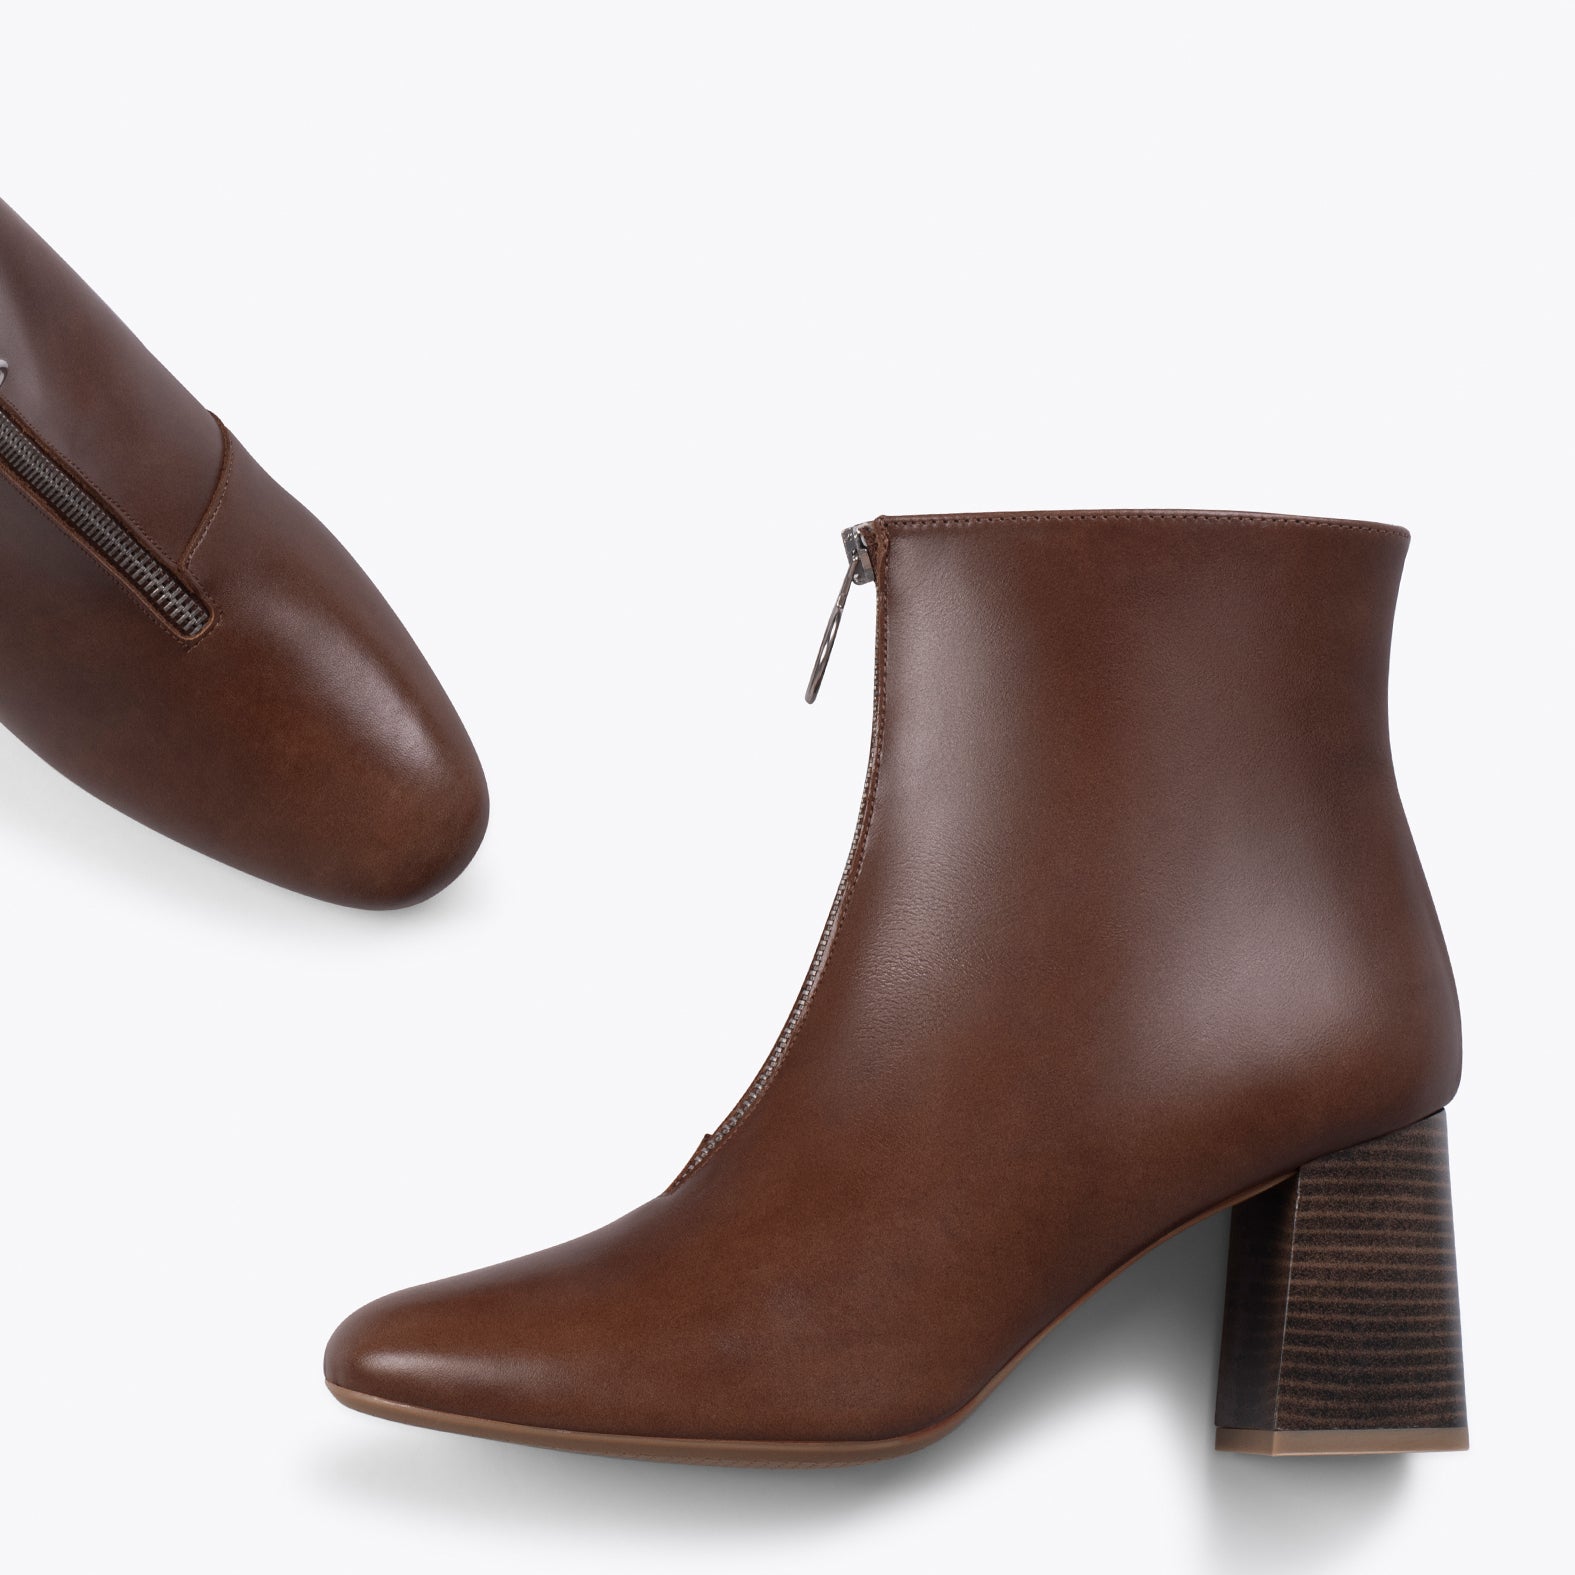 GIRL – BROWN bootie with decorative front zipper